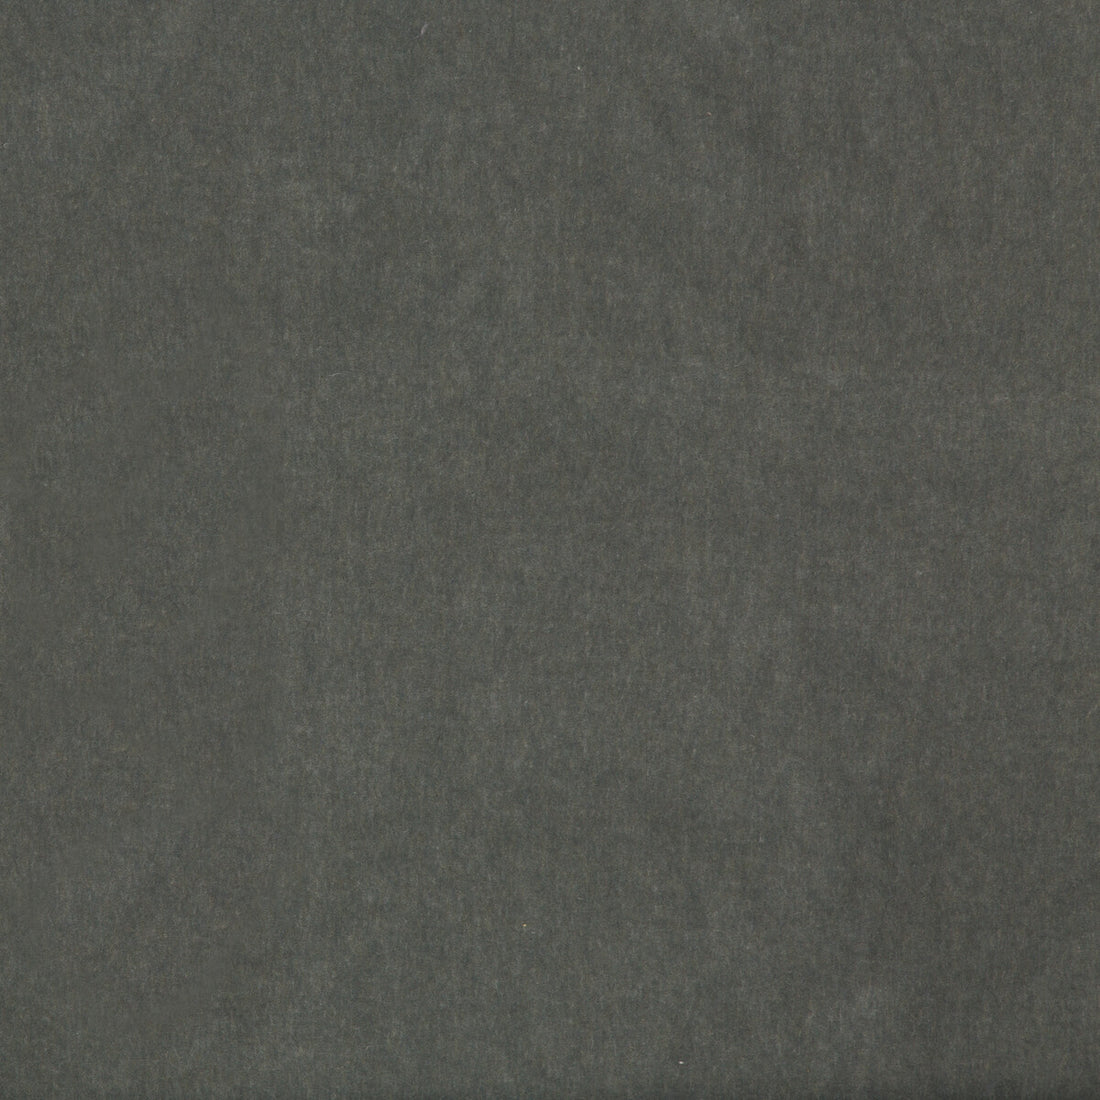 Countess Mohair fabric in steel color - pattern 34290.52.0 - by Kravet Couture